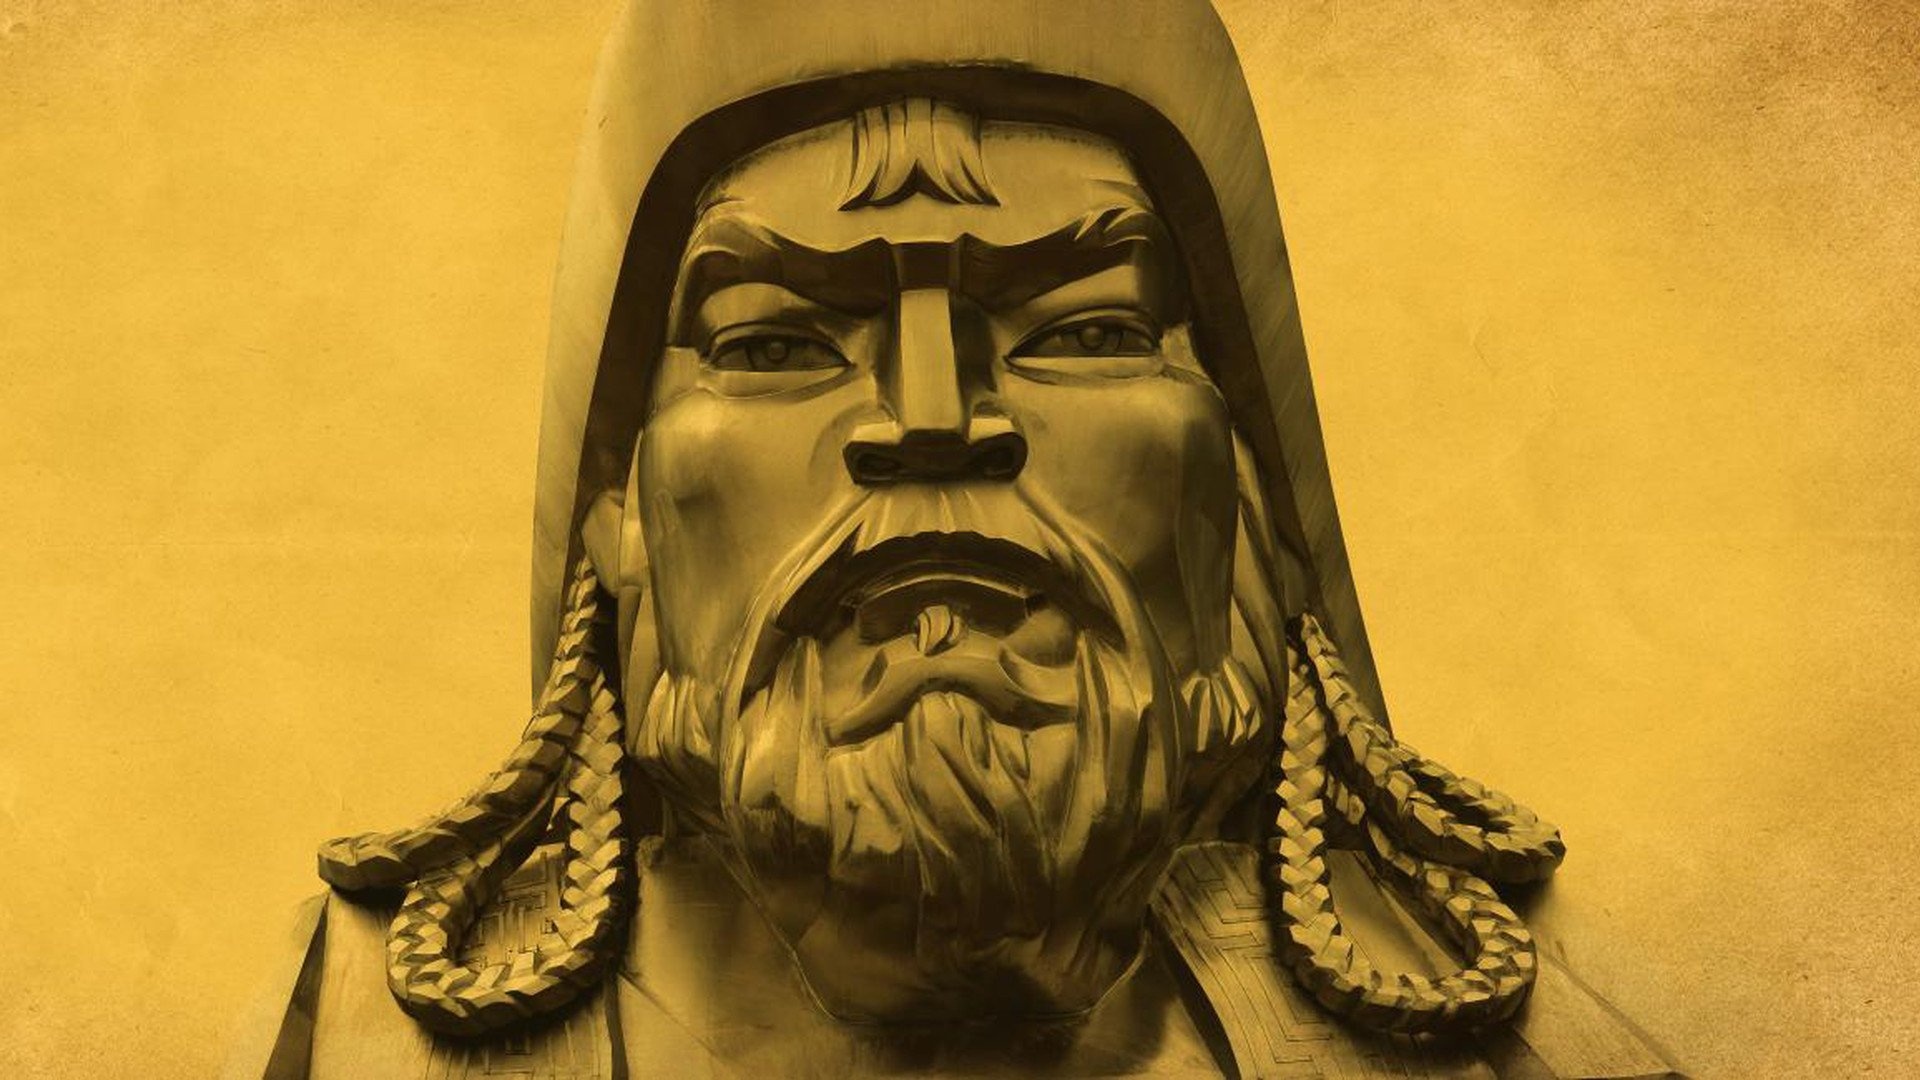 HD wallpaper, Genghis Khan, Image Id 19209, Image Abyss, Genghis Khan Ii, 1920X1080 Full Hd Desktop, Desktop 1080P Genghis Khan Wallpaper Image